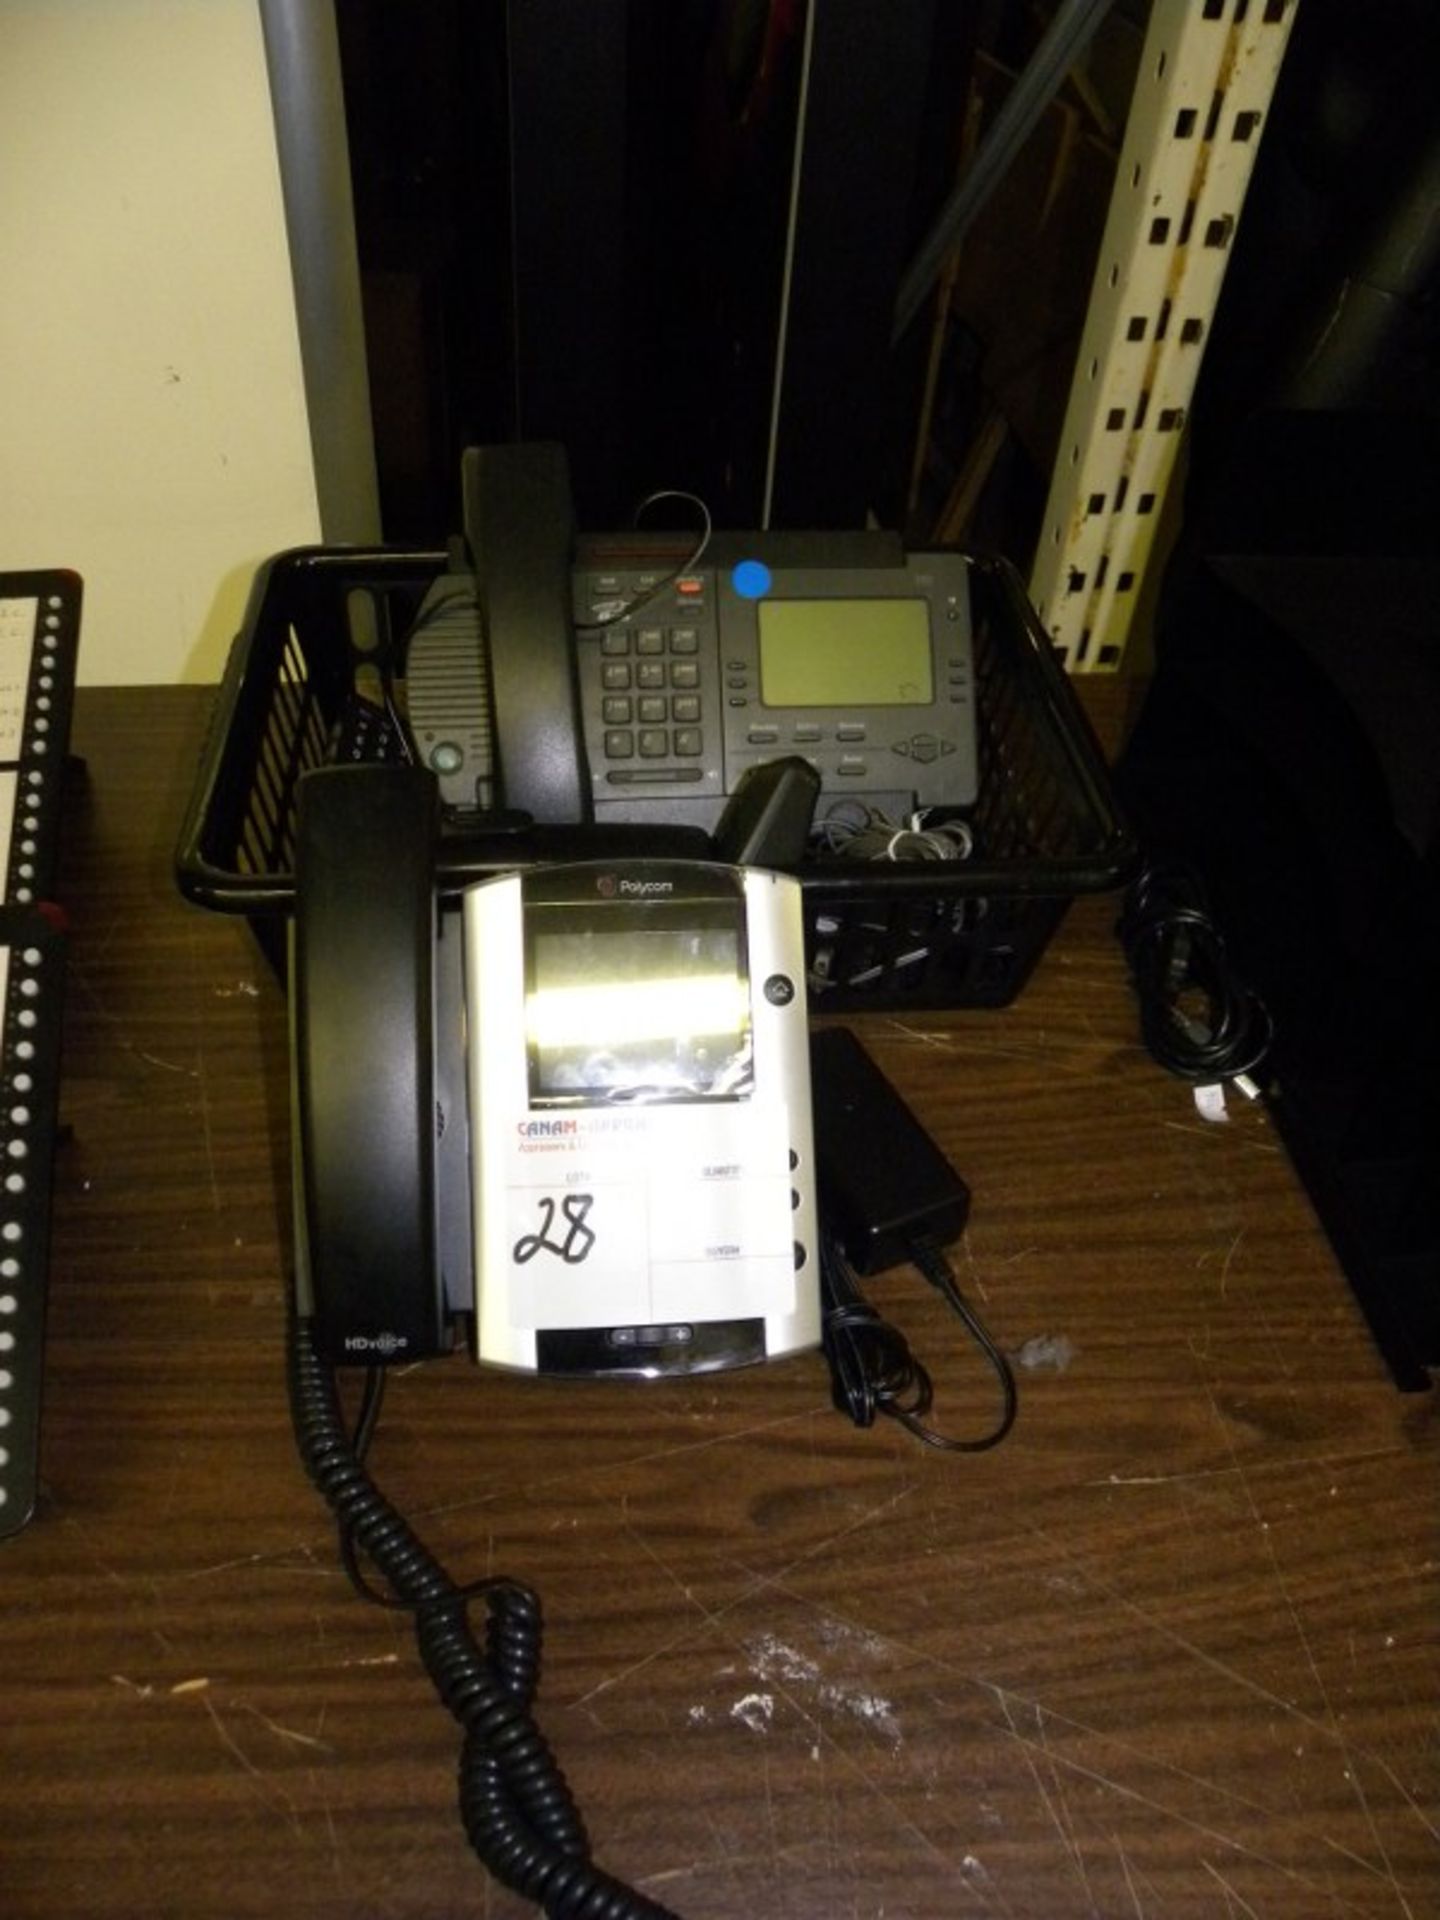 POLYCOM VOIP PHONE, BELL 350 DISPLAY PHONE